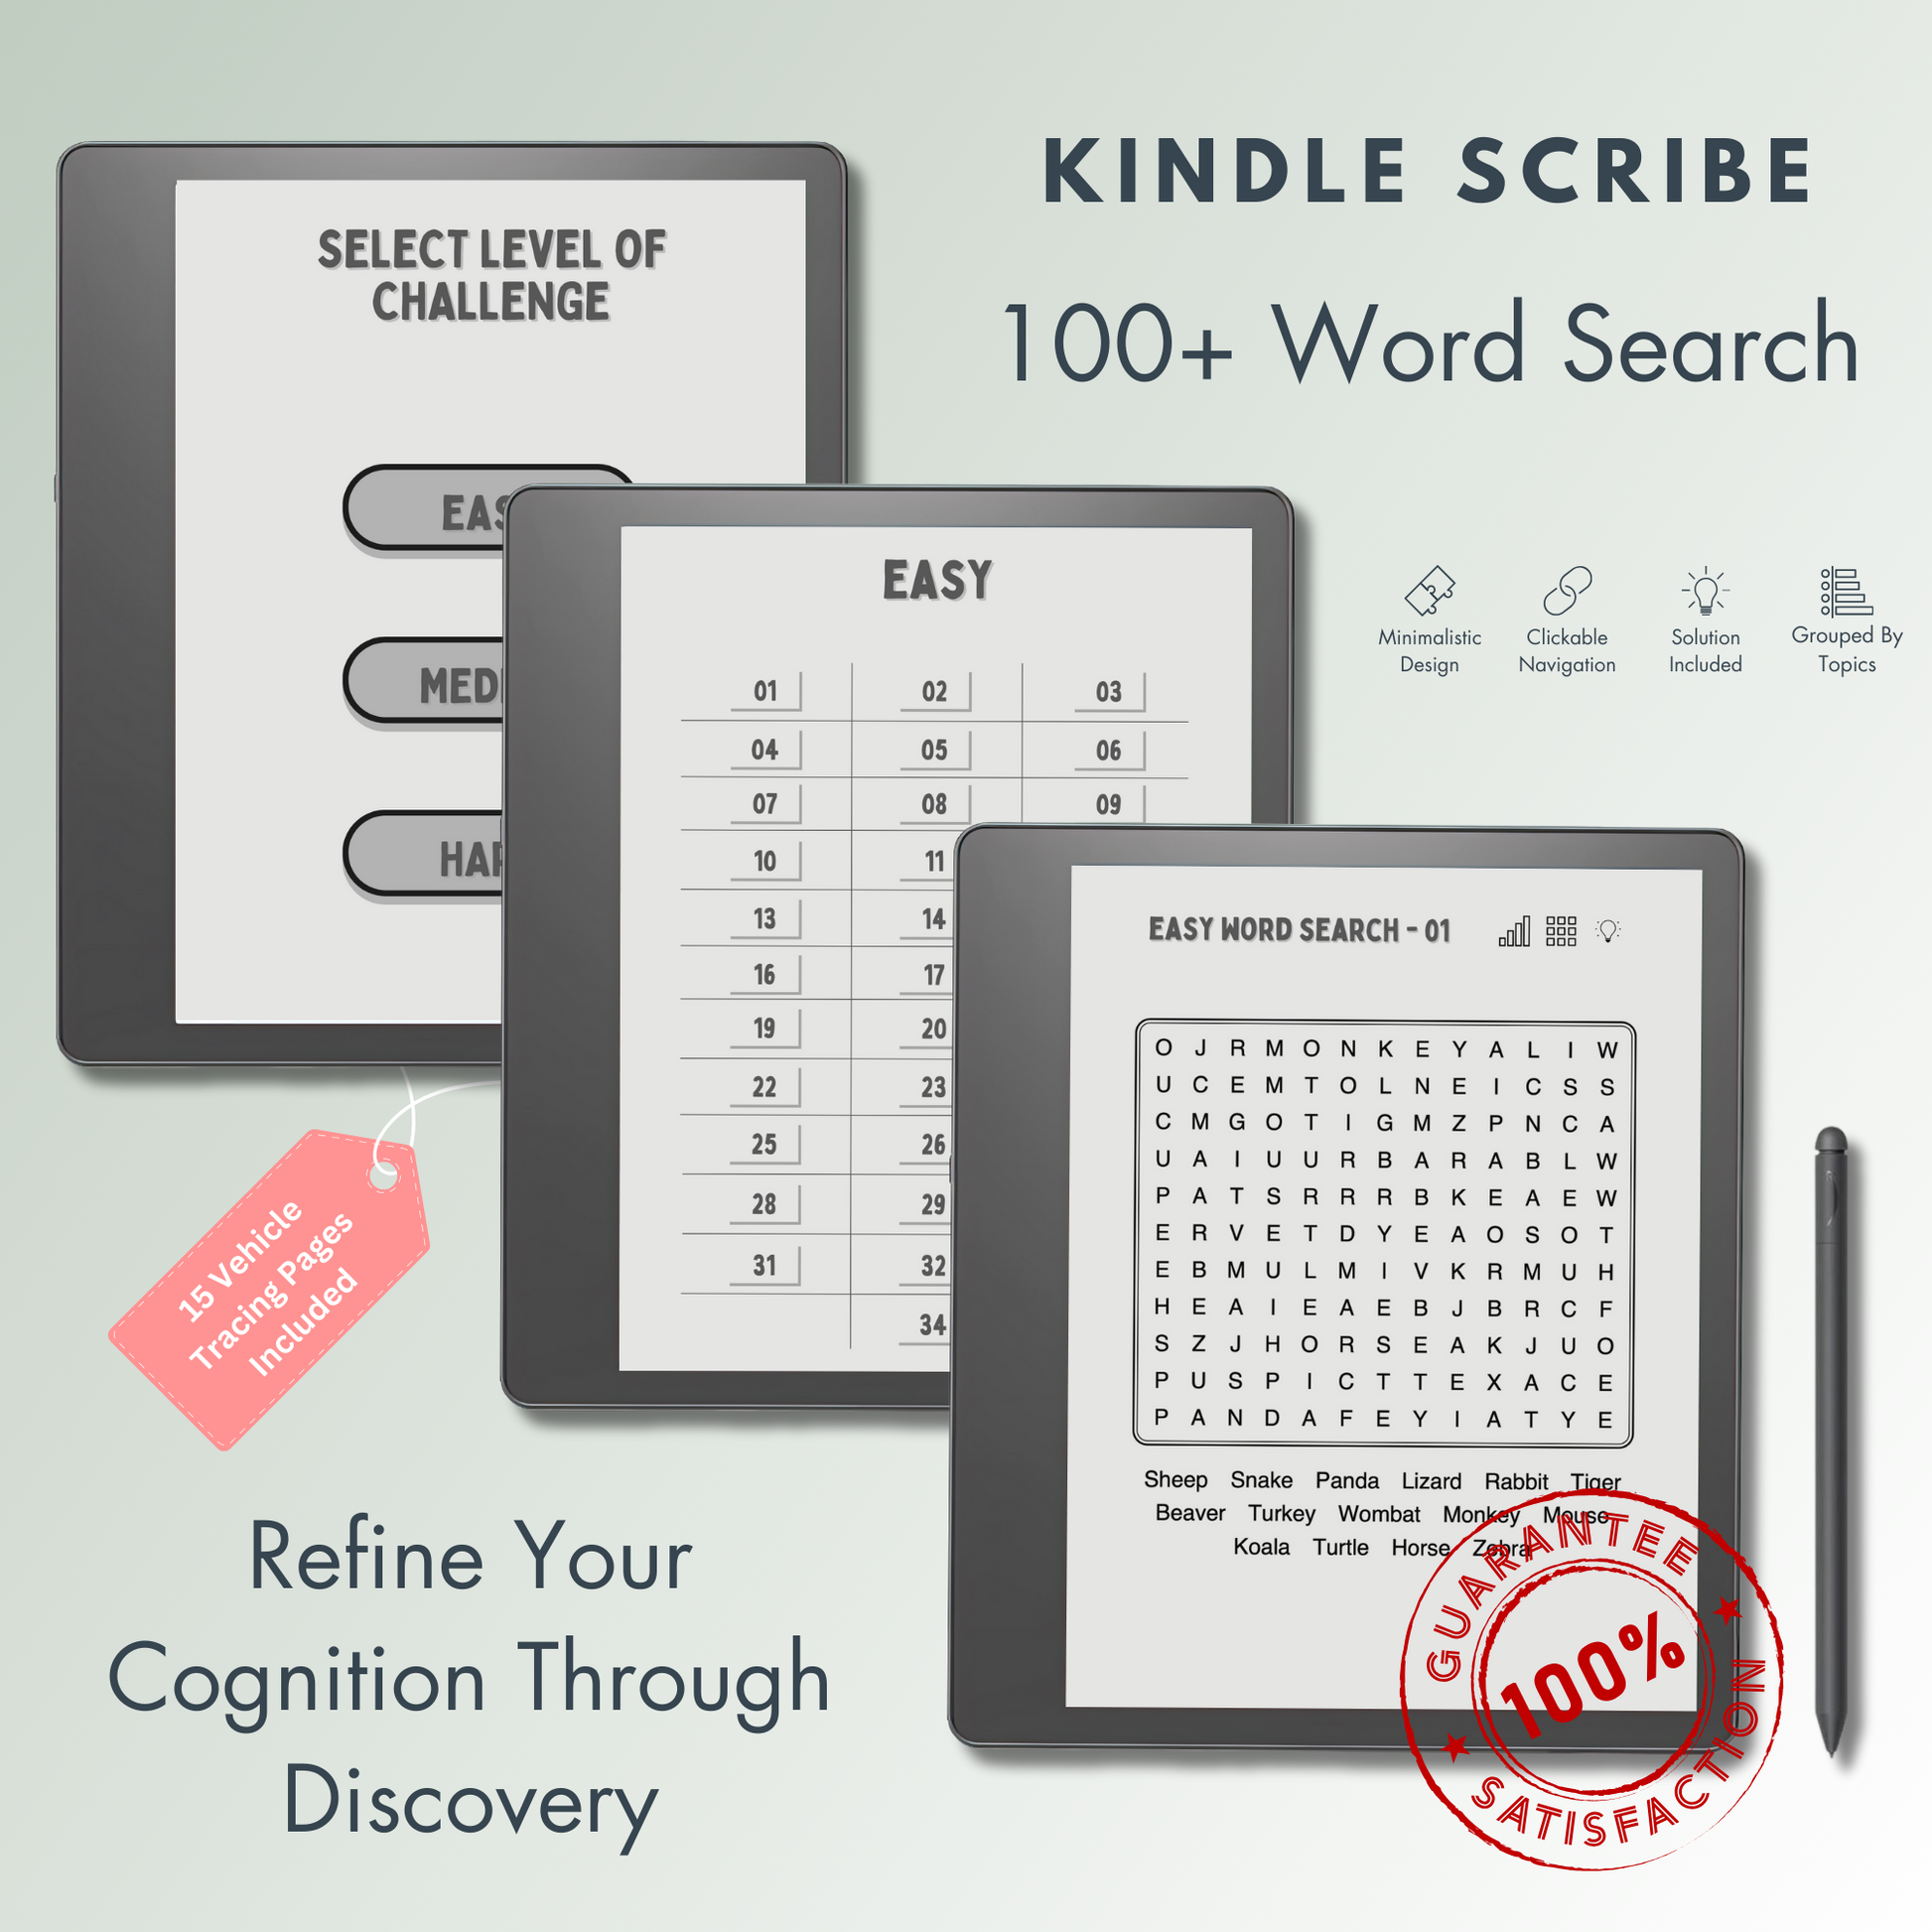 This is a Digital Download of 100+ Word Search Puzzles in 3 different levels tailored for Kindle Scribe.